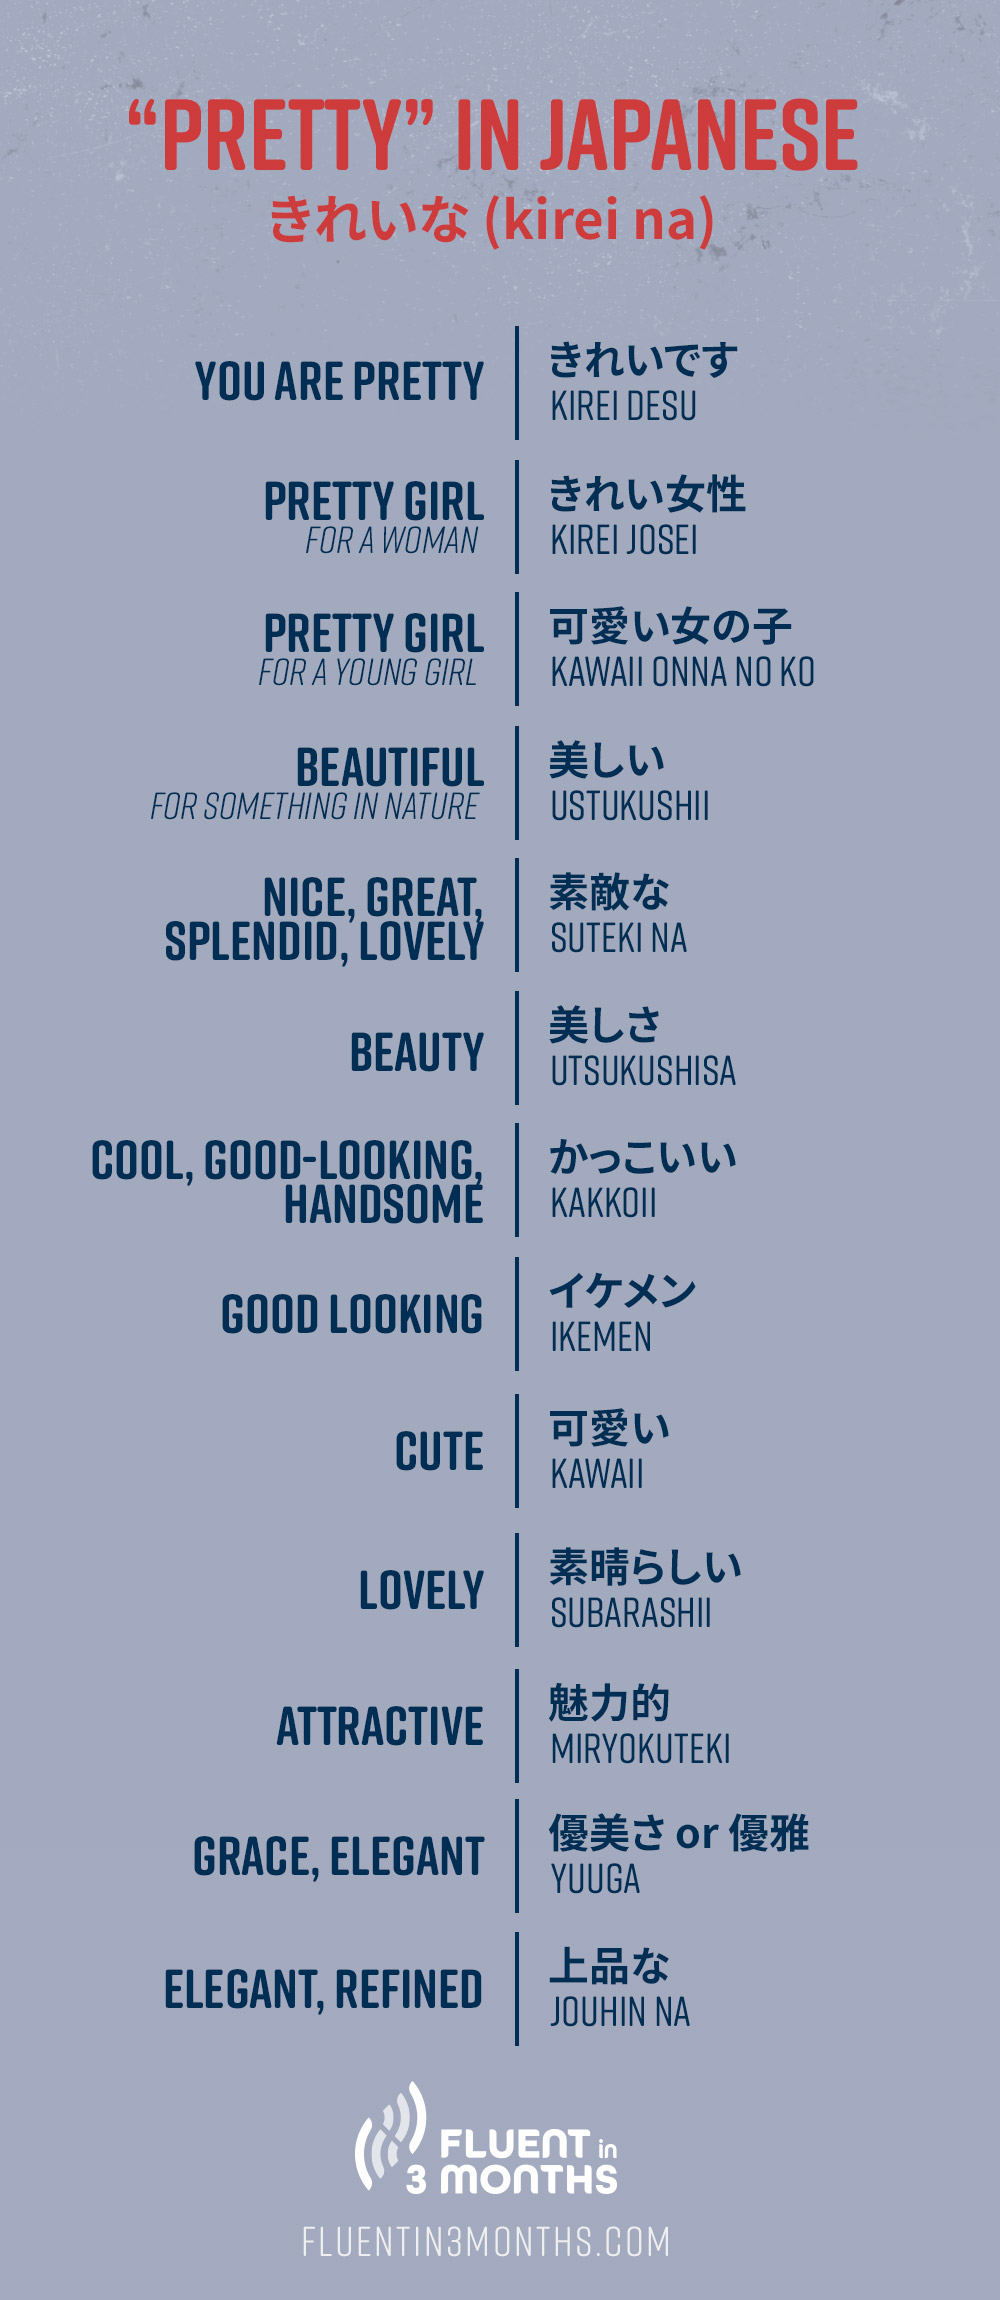 Pin on Japanese Phrases from Anime/Manga